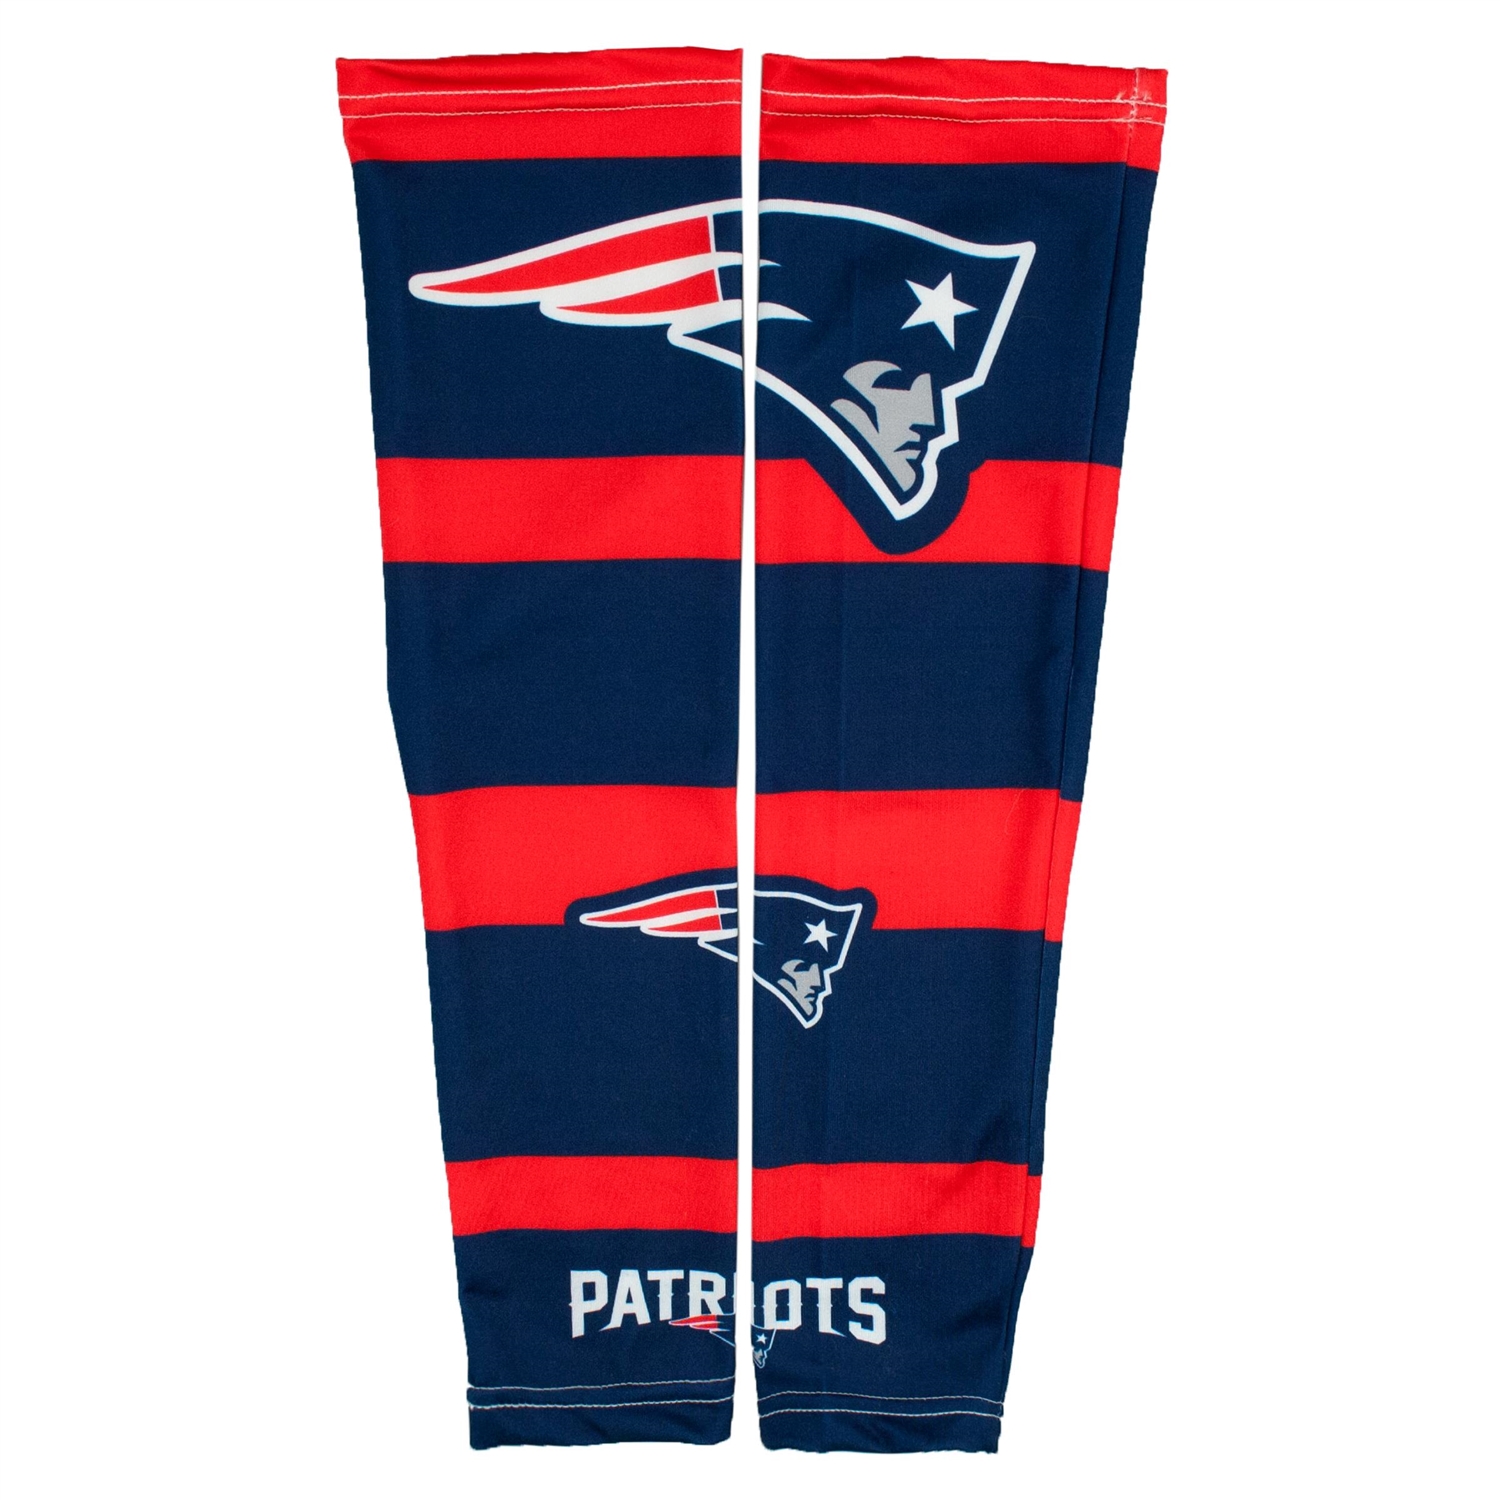 NFL NEW England Patriots - Strong Arms - Sleeves